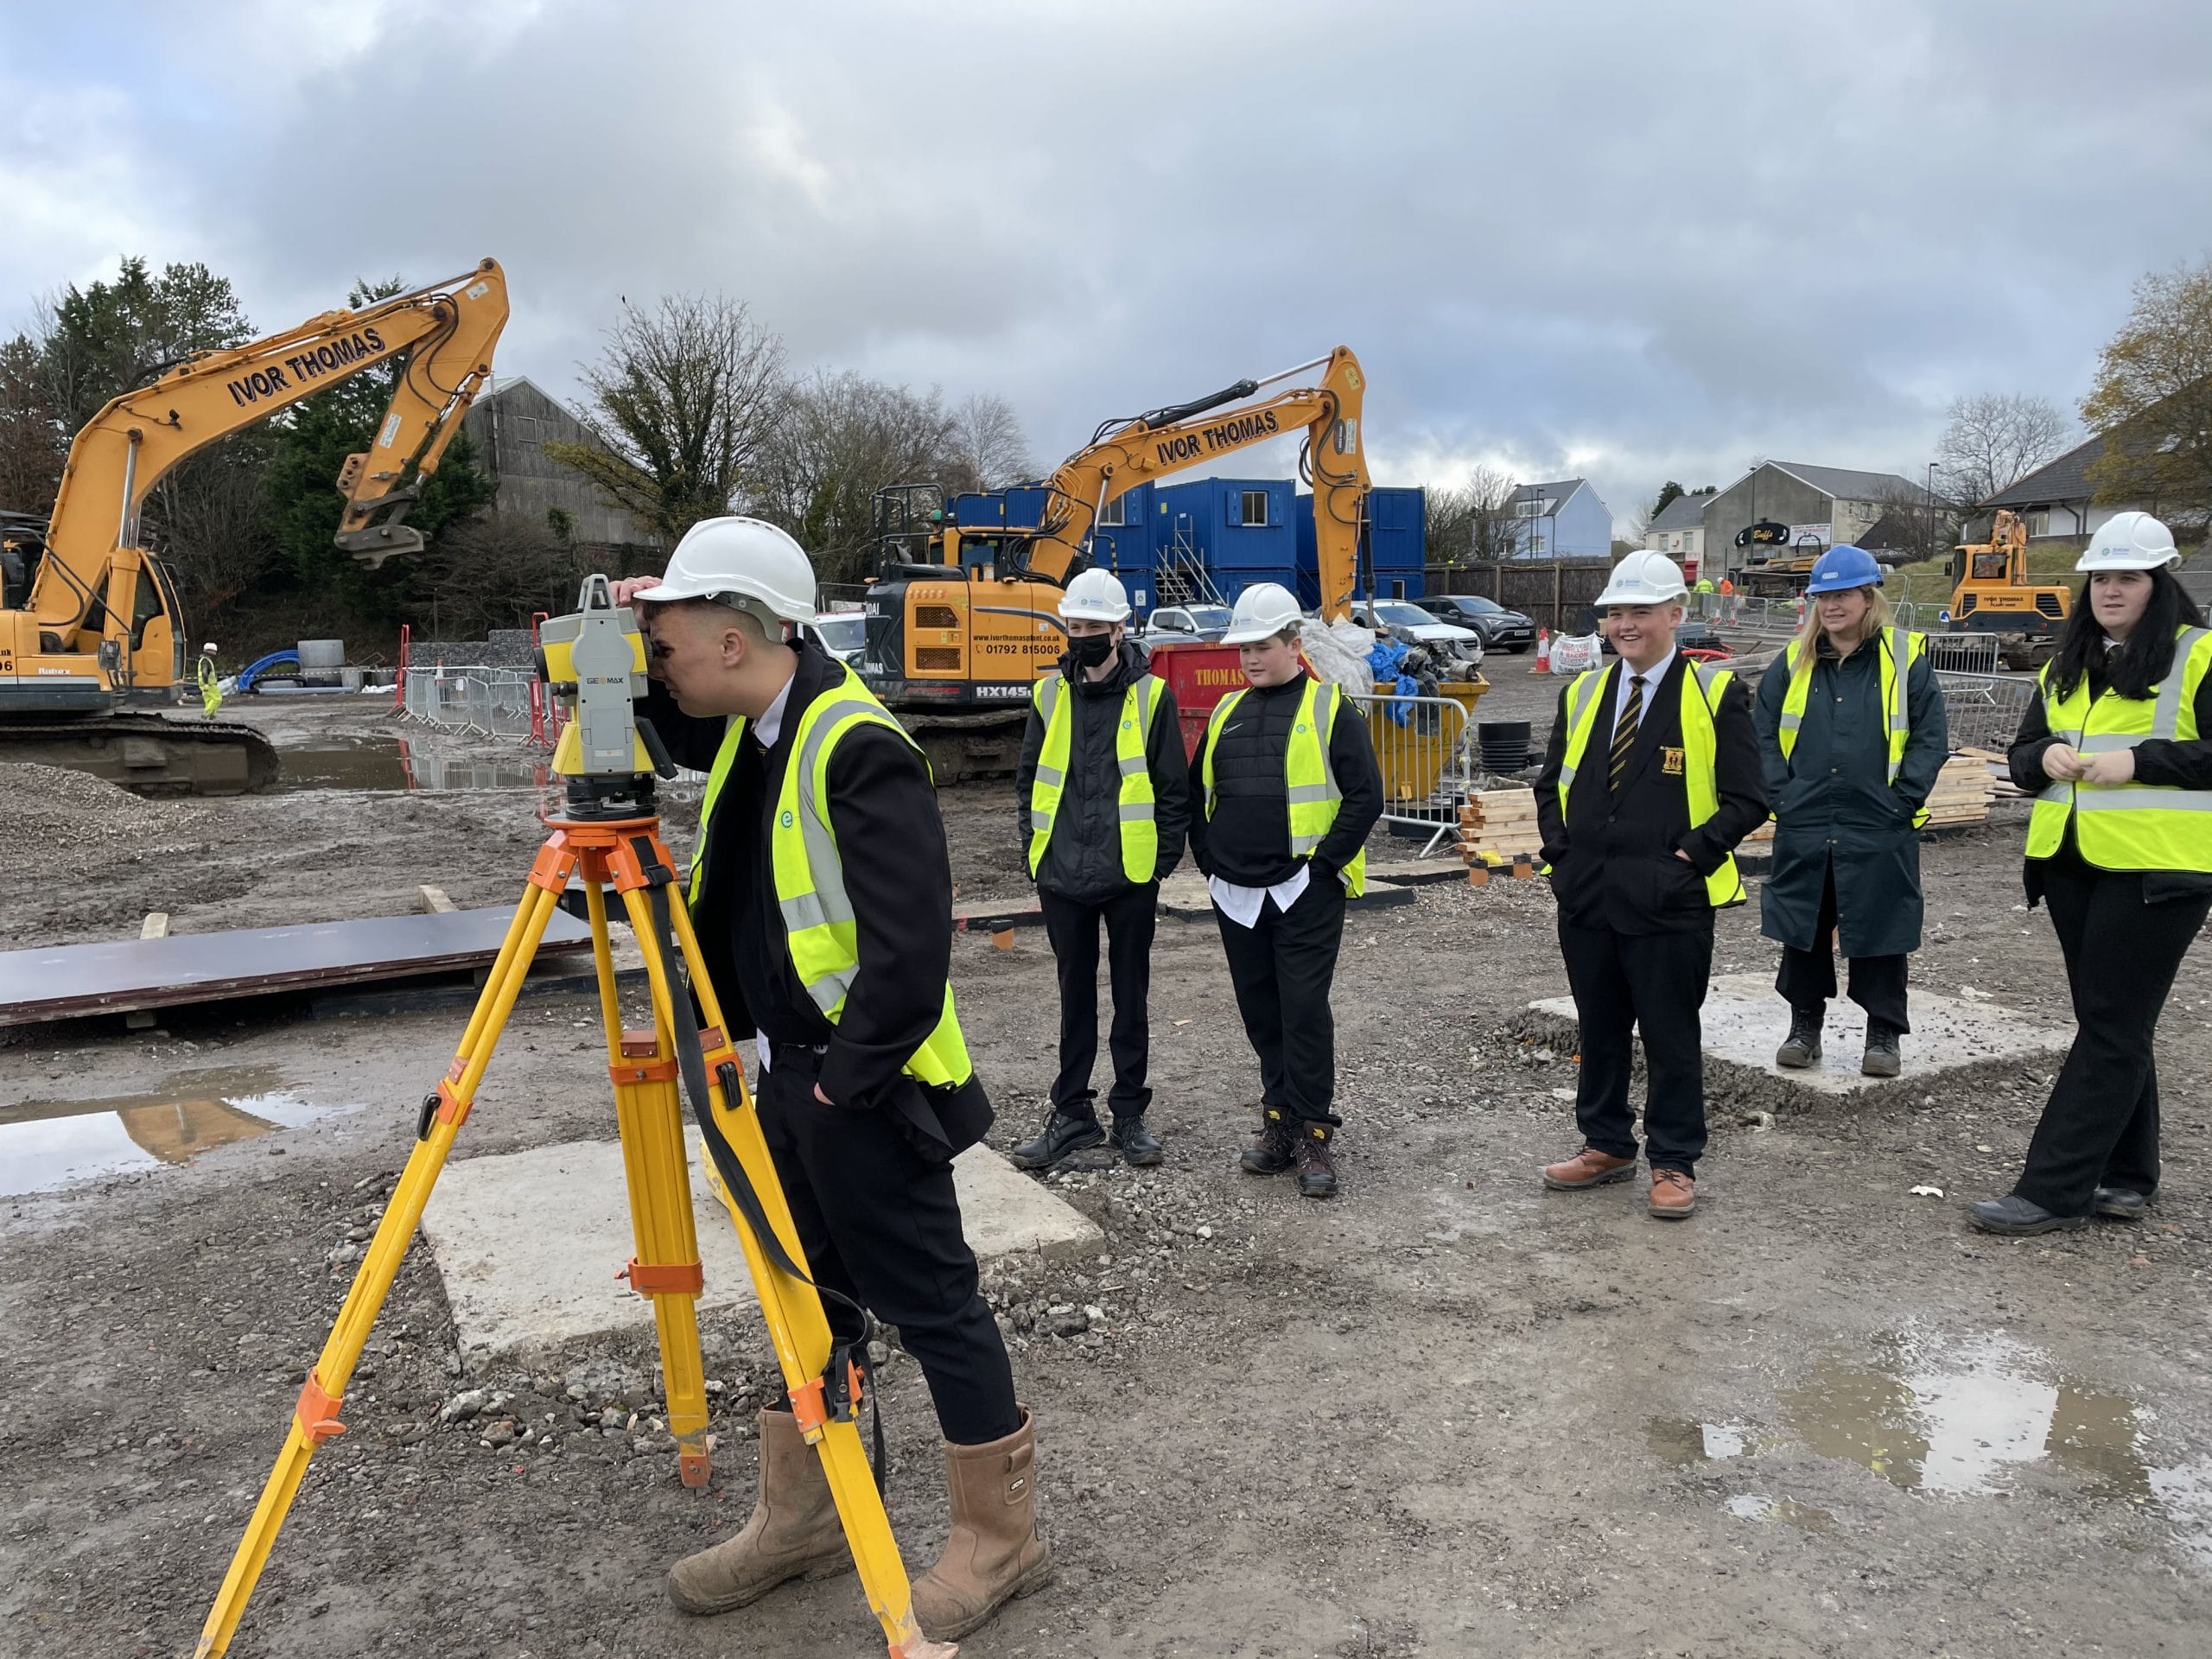 School Visits for CITB ‘See Your Site’